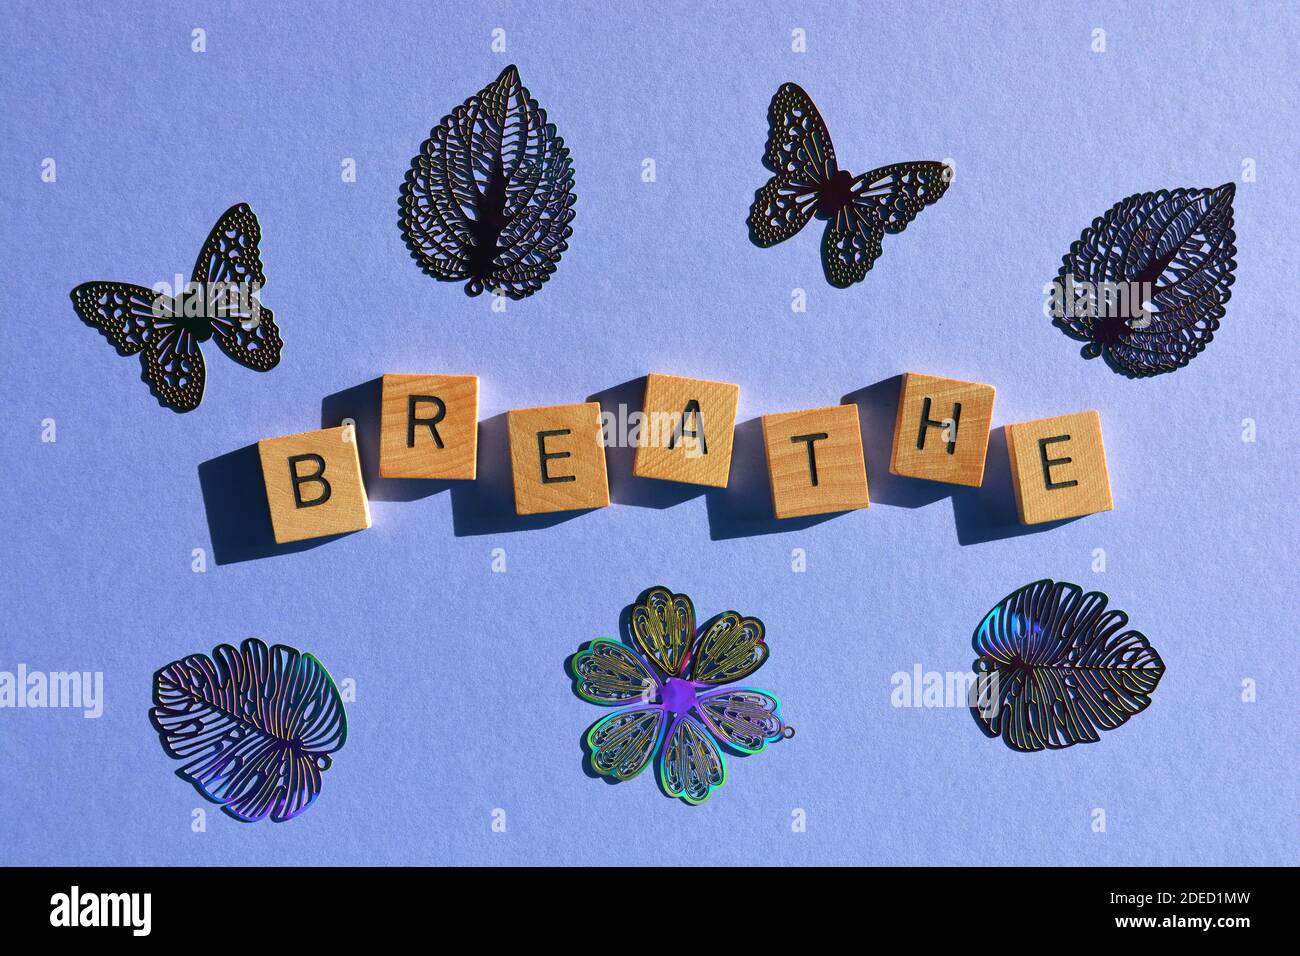 Breathe, word in wooden alphabet letters with leaf and butterfly shapes isolated on purple background Stock Photo